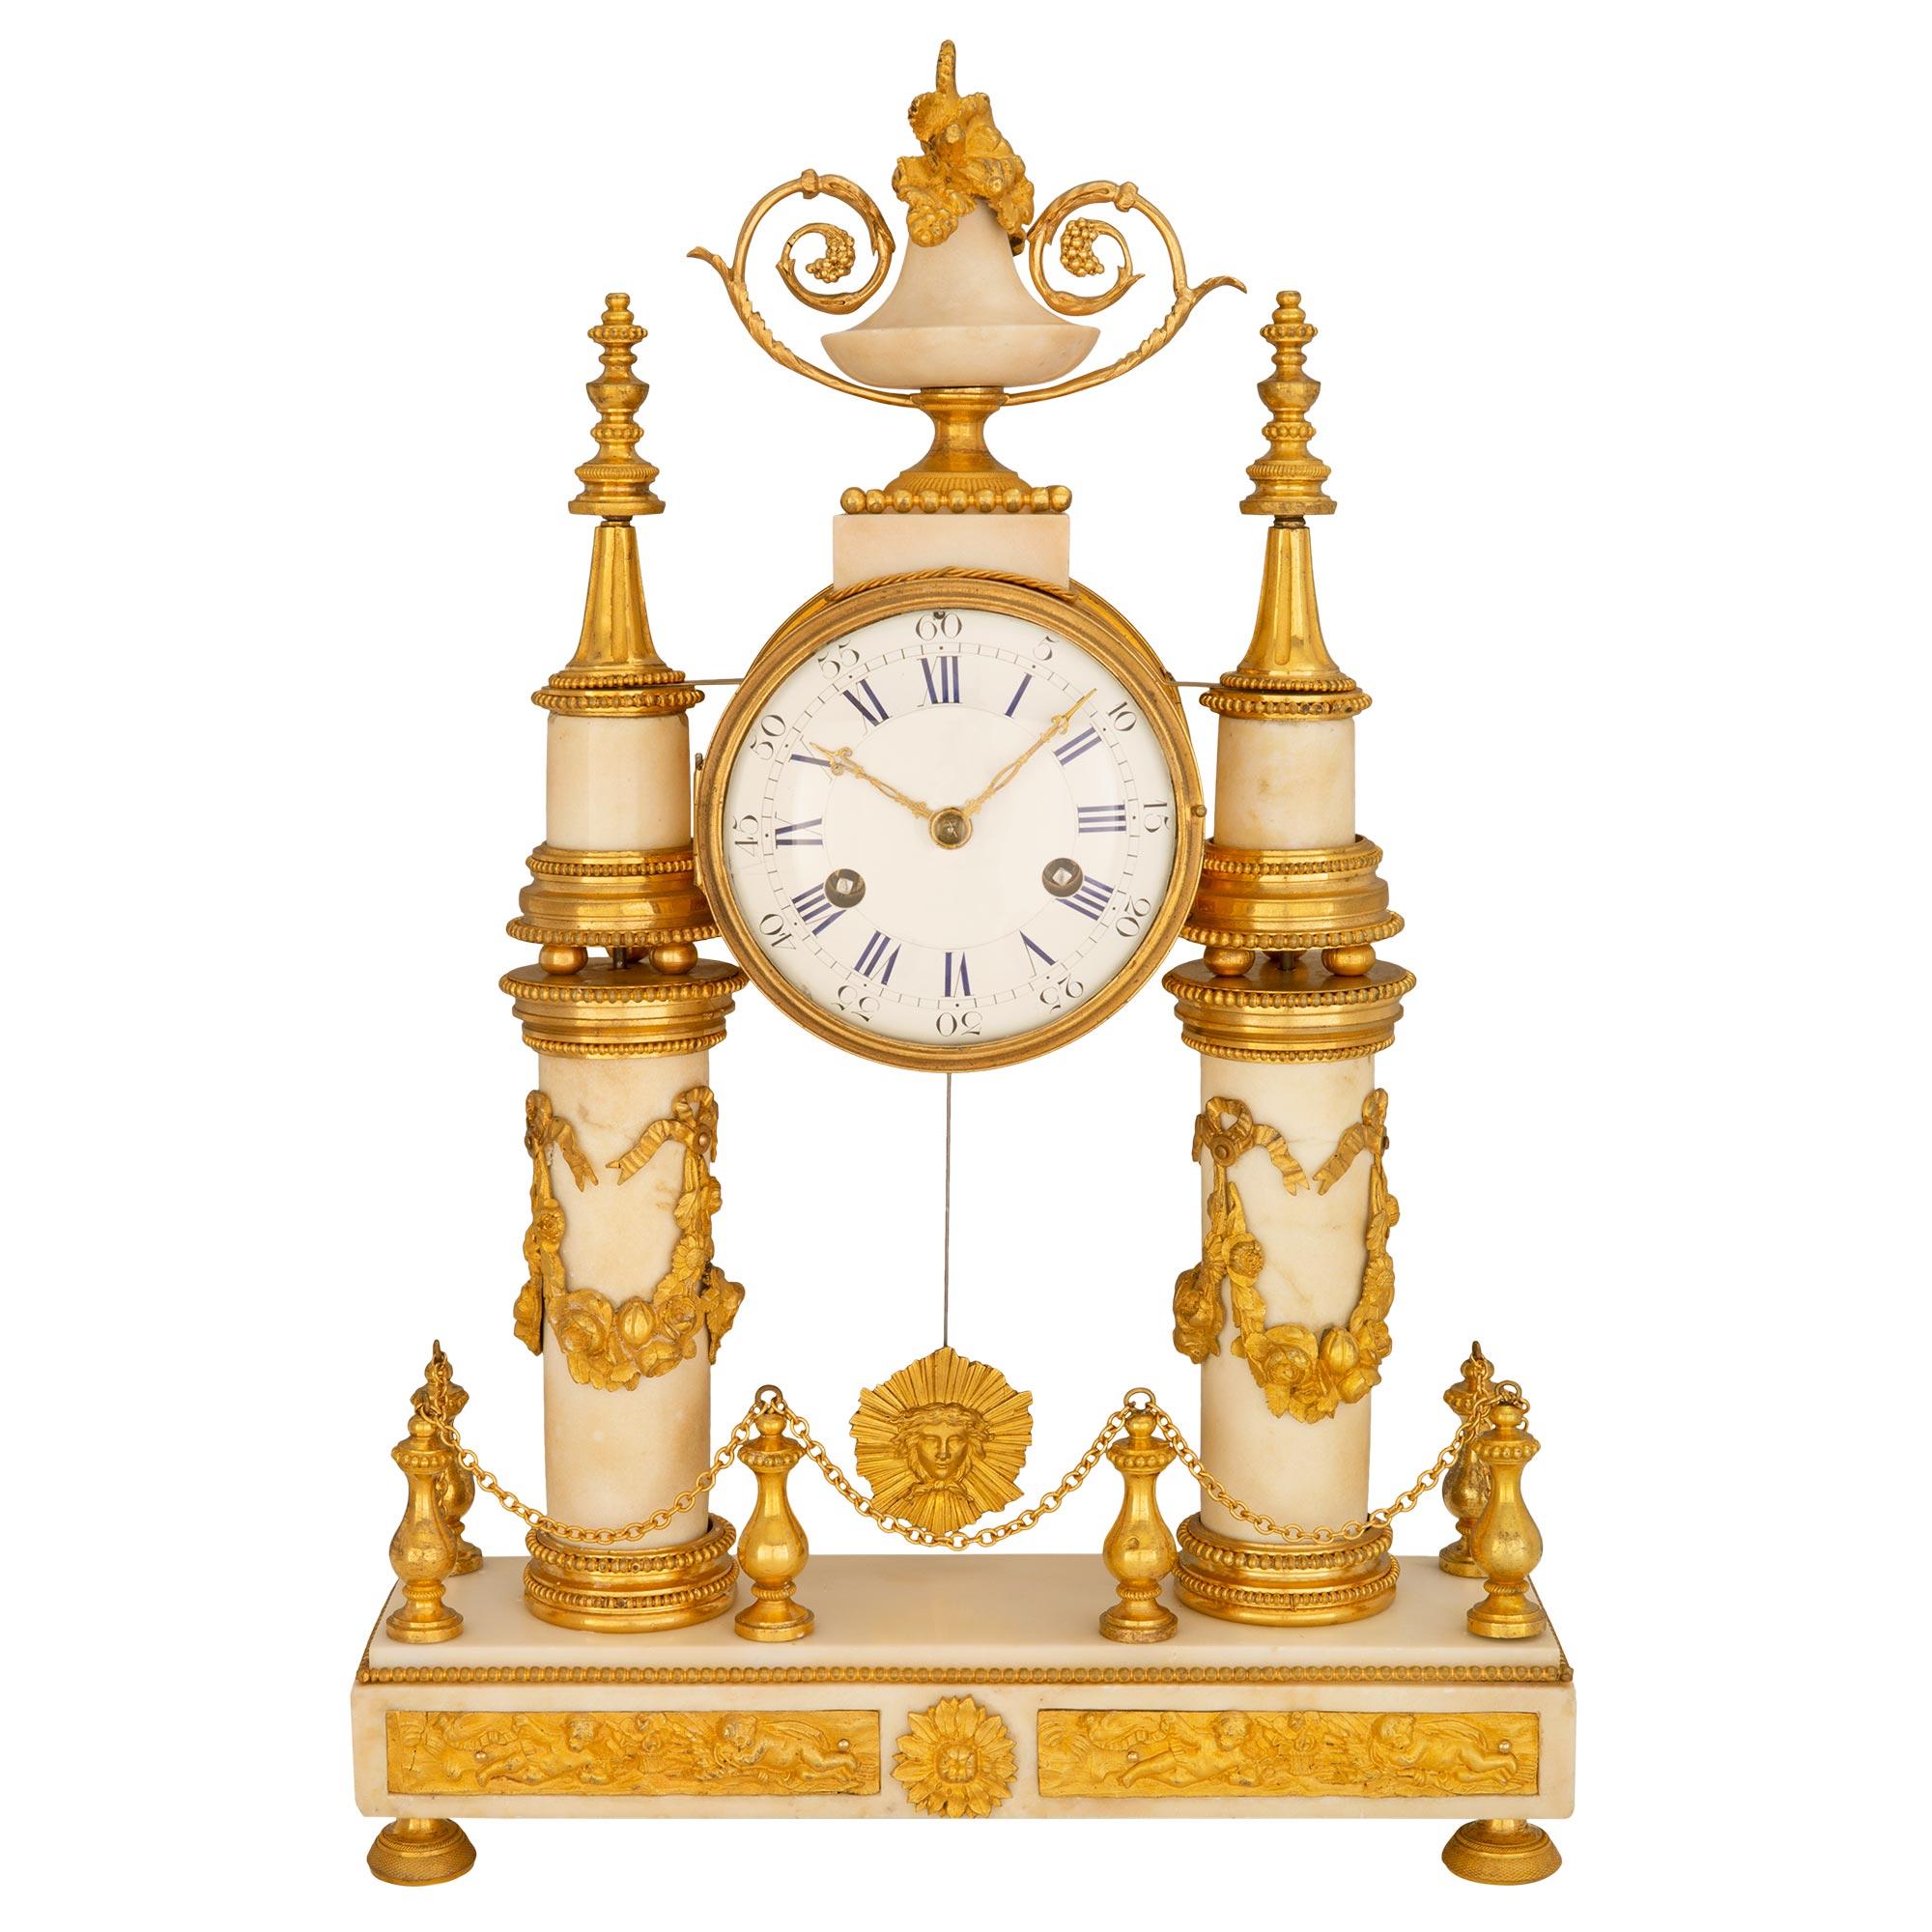 An exquisite French early 19th century Louis XVI st. white Carrara marble and ormolu mounted clock. Raised on ormolu supports the rectangular marble base with beaded trim and Clodion style plaques is centered by a floral mount. Above ormolu